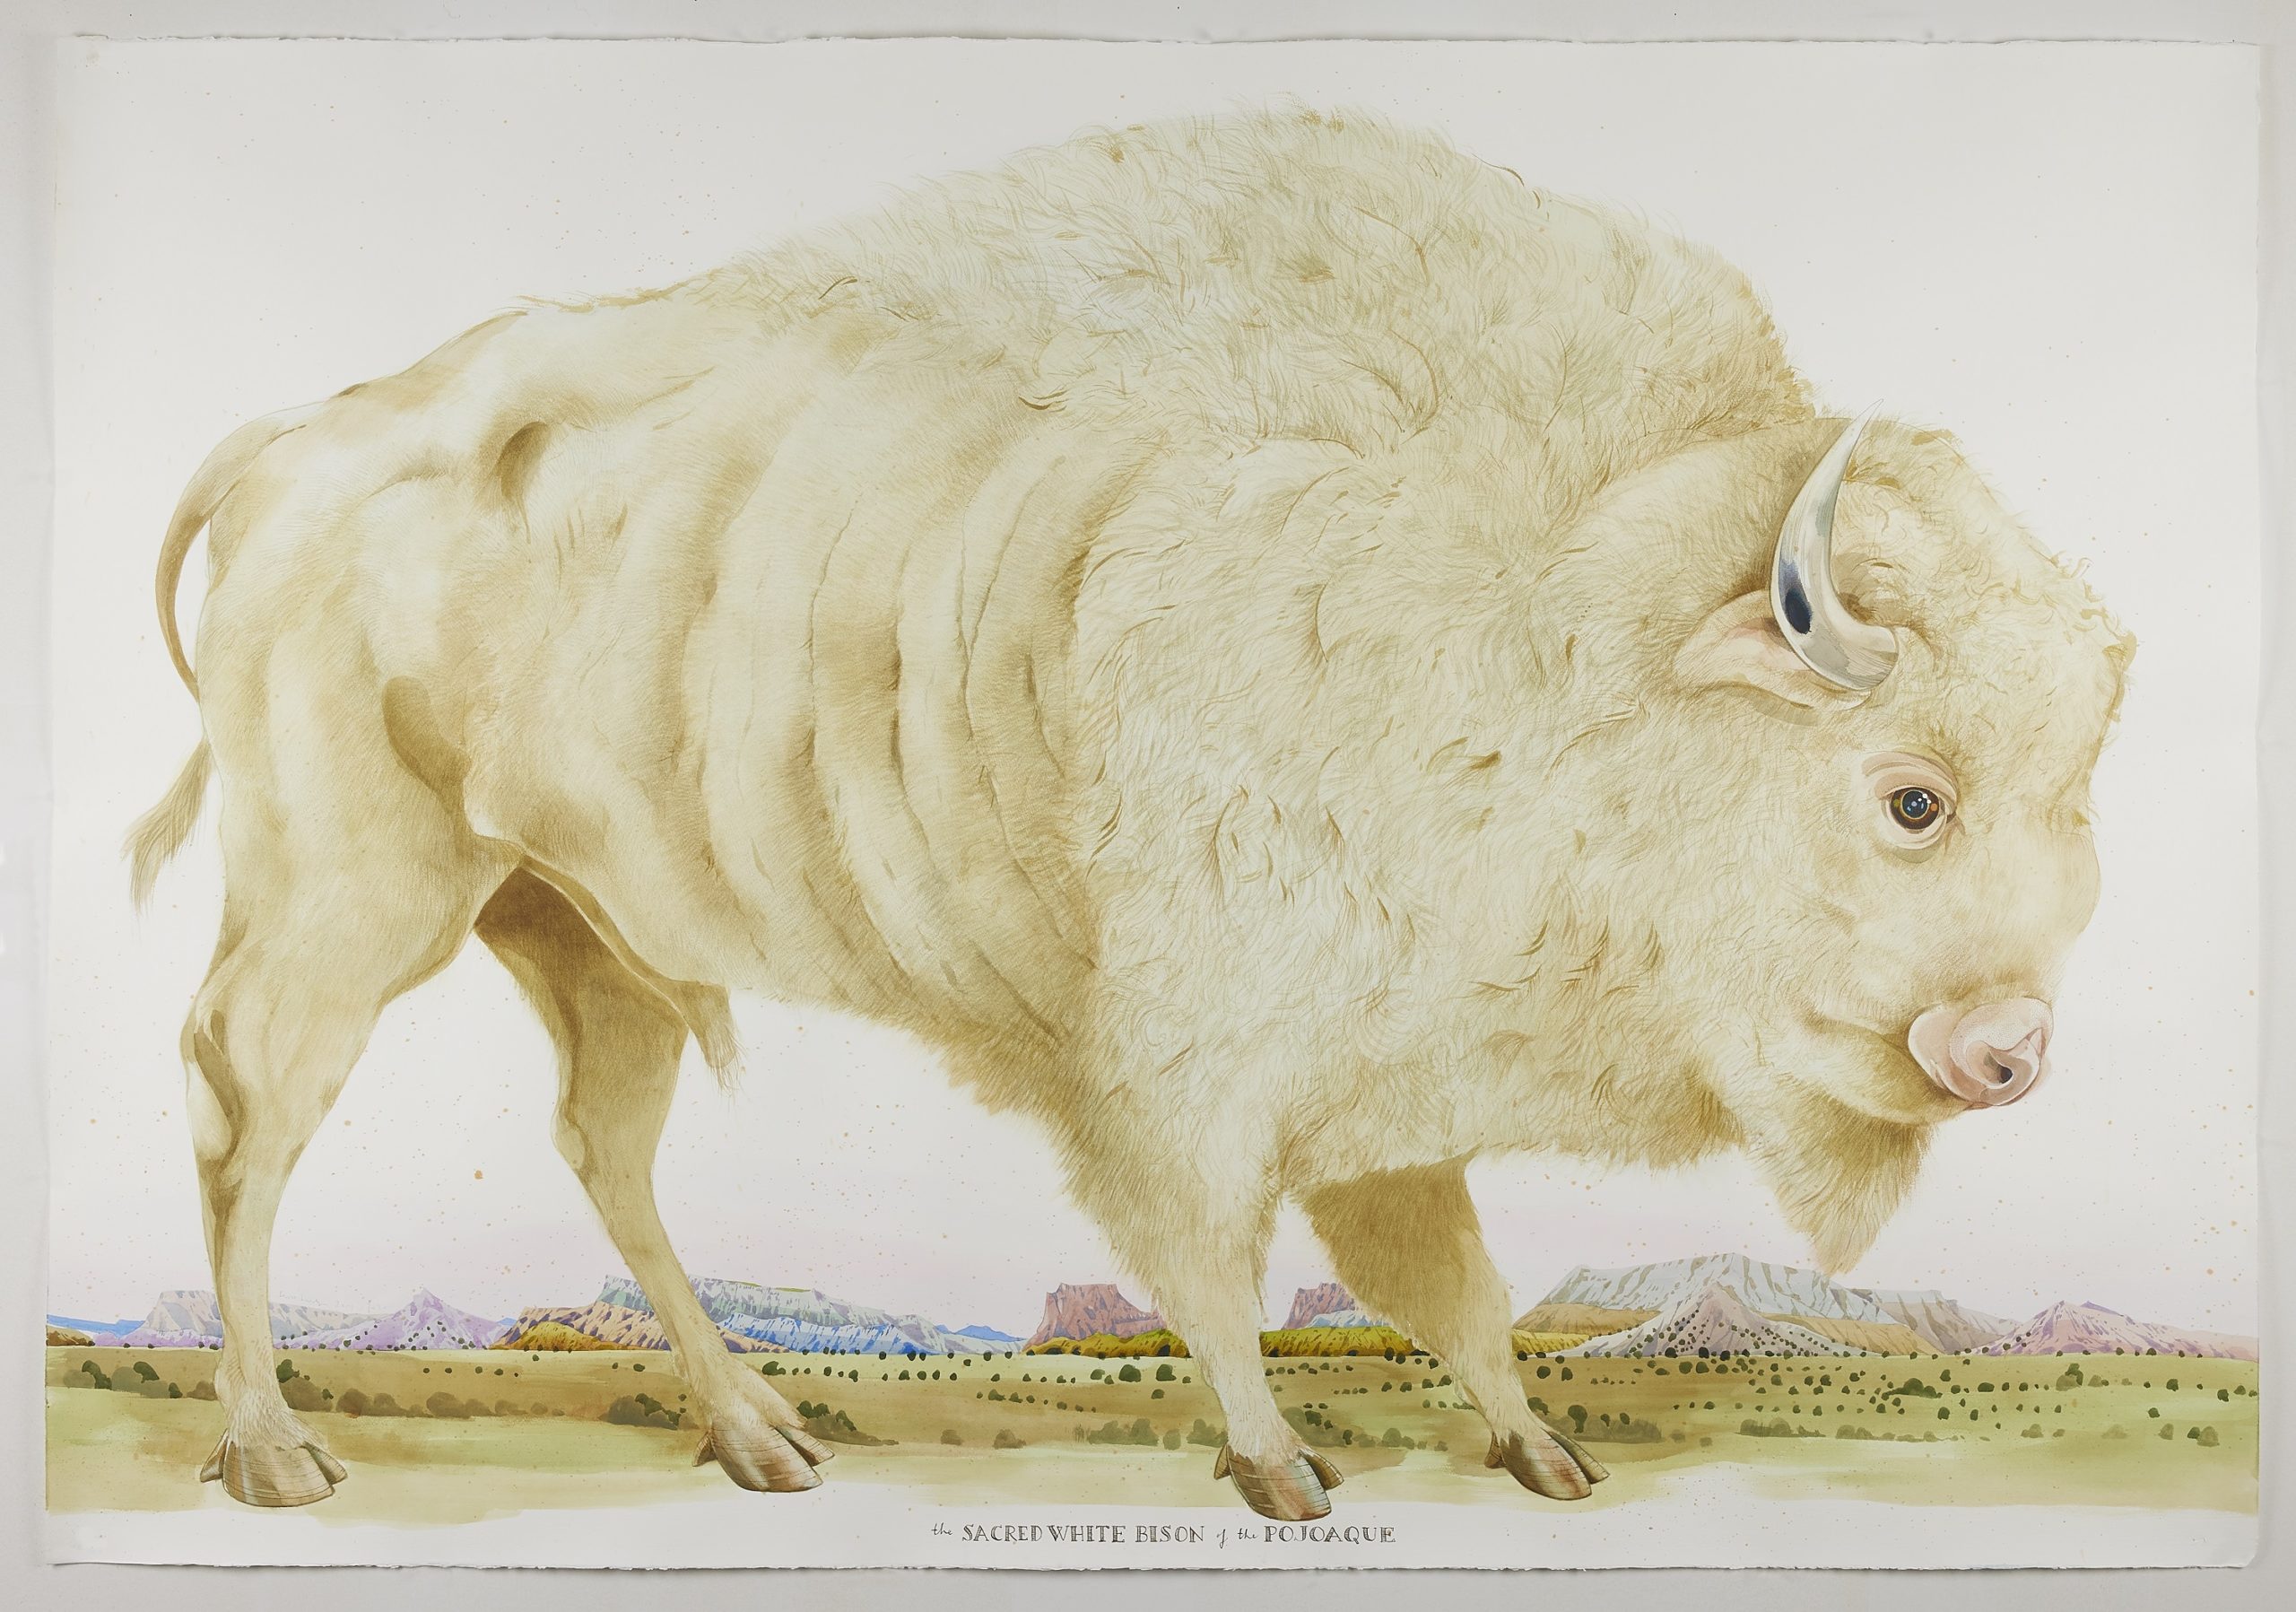 

											Scott Kelley</b>

											<em>
												Gray Salt - Lost in Ah-Shi-Sle-Pah </em> 

											<h4>
												June 25 - July 24, 2021											</h4>

		                																																													<i>The Sacred White Buffalo of the Pojoaque,</i>  
																																								2020-2021, 
																																								watercolor, gouache and ink on paper, 
																																								55 x 80 1/2 inches 
																								
		                				